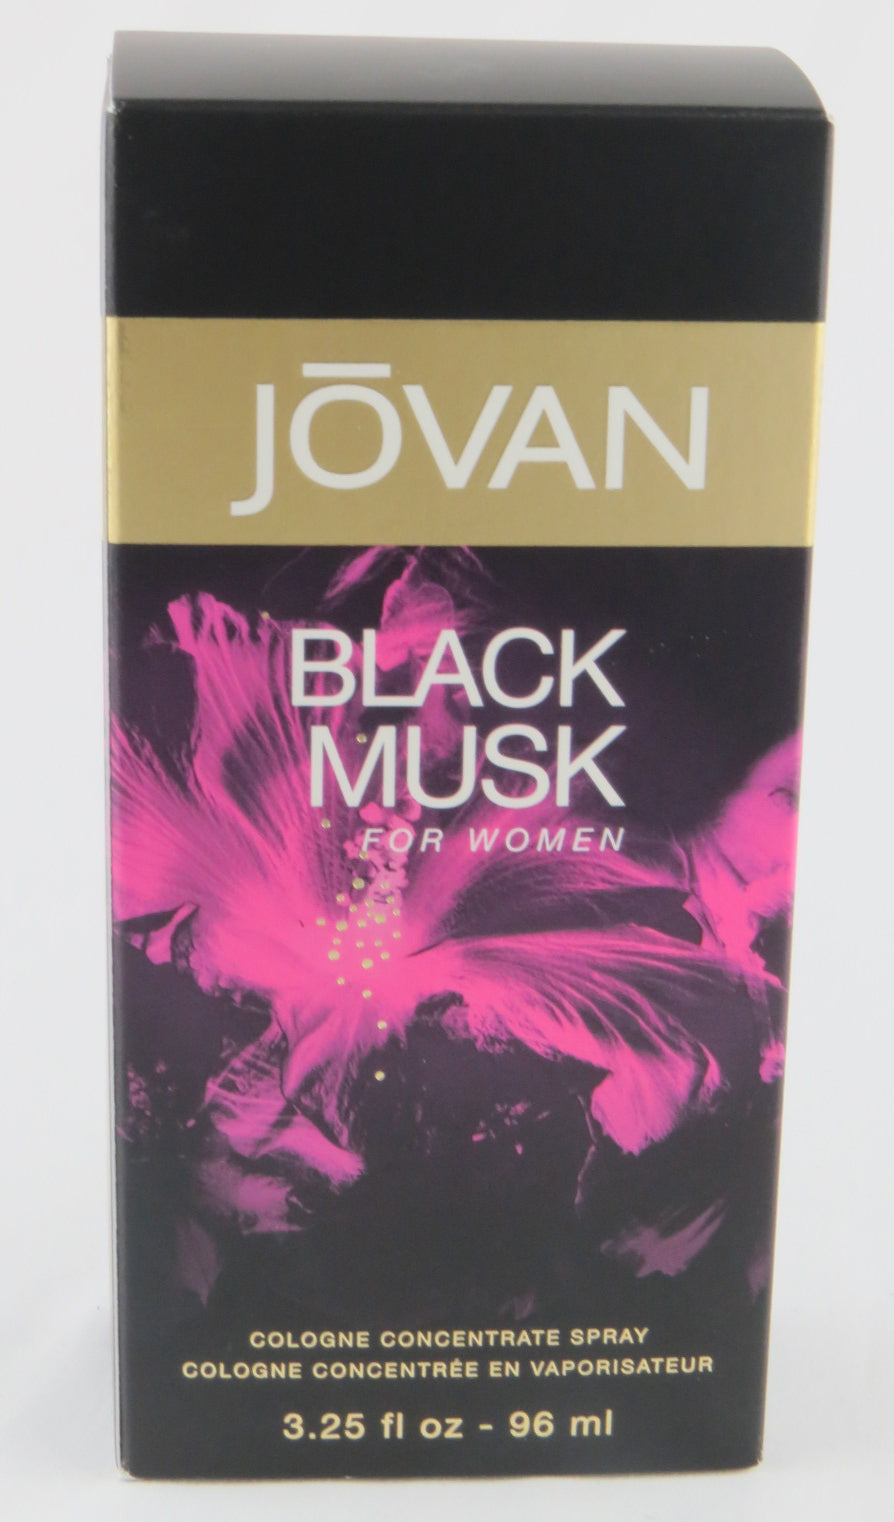 Perfume Jovan Black Musk by Jovan Cologne Concentrate Spray 3.25 oz for Women - Banachief Outlet